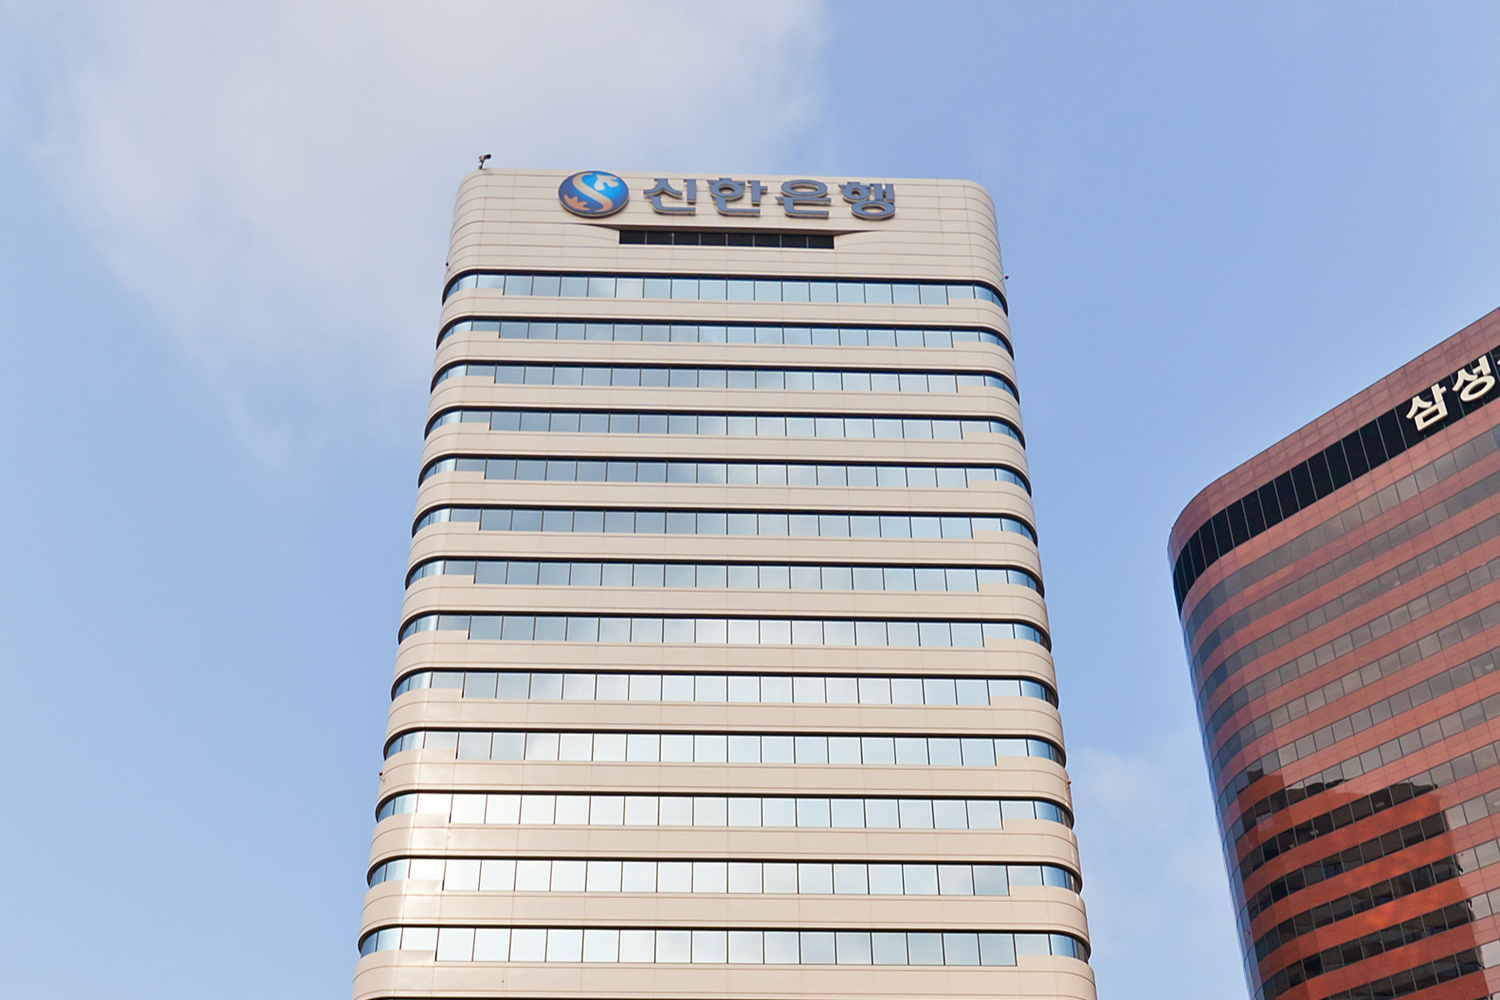 South Korea’s Shinhan Bank Turns To Blockchain To Speed Up Loan Issuance